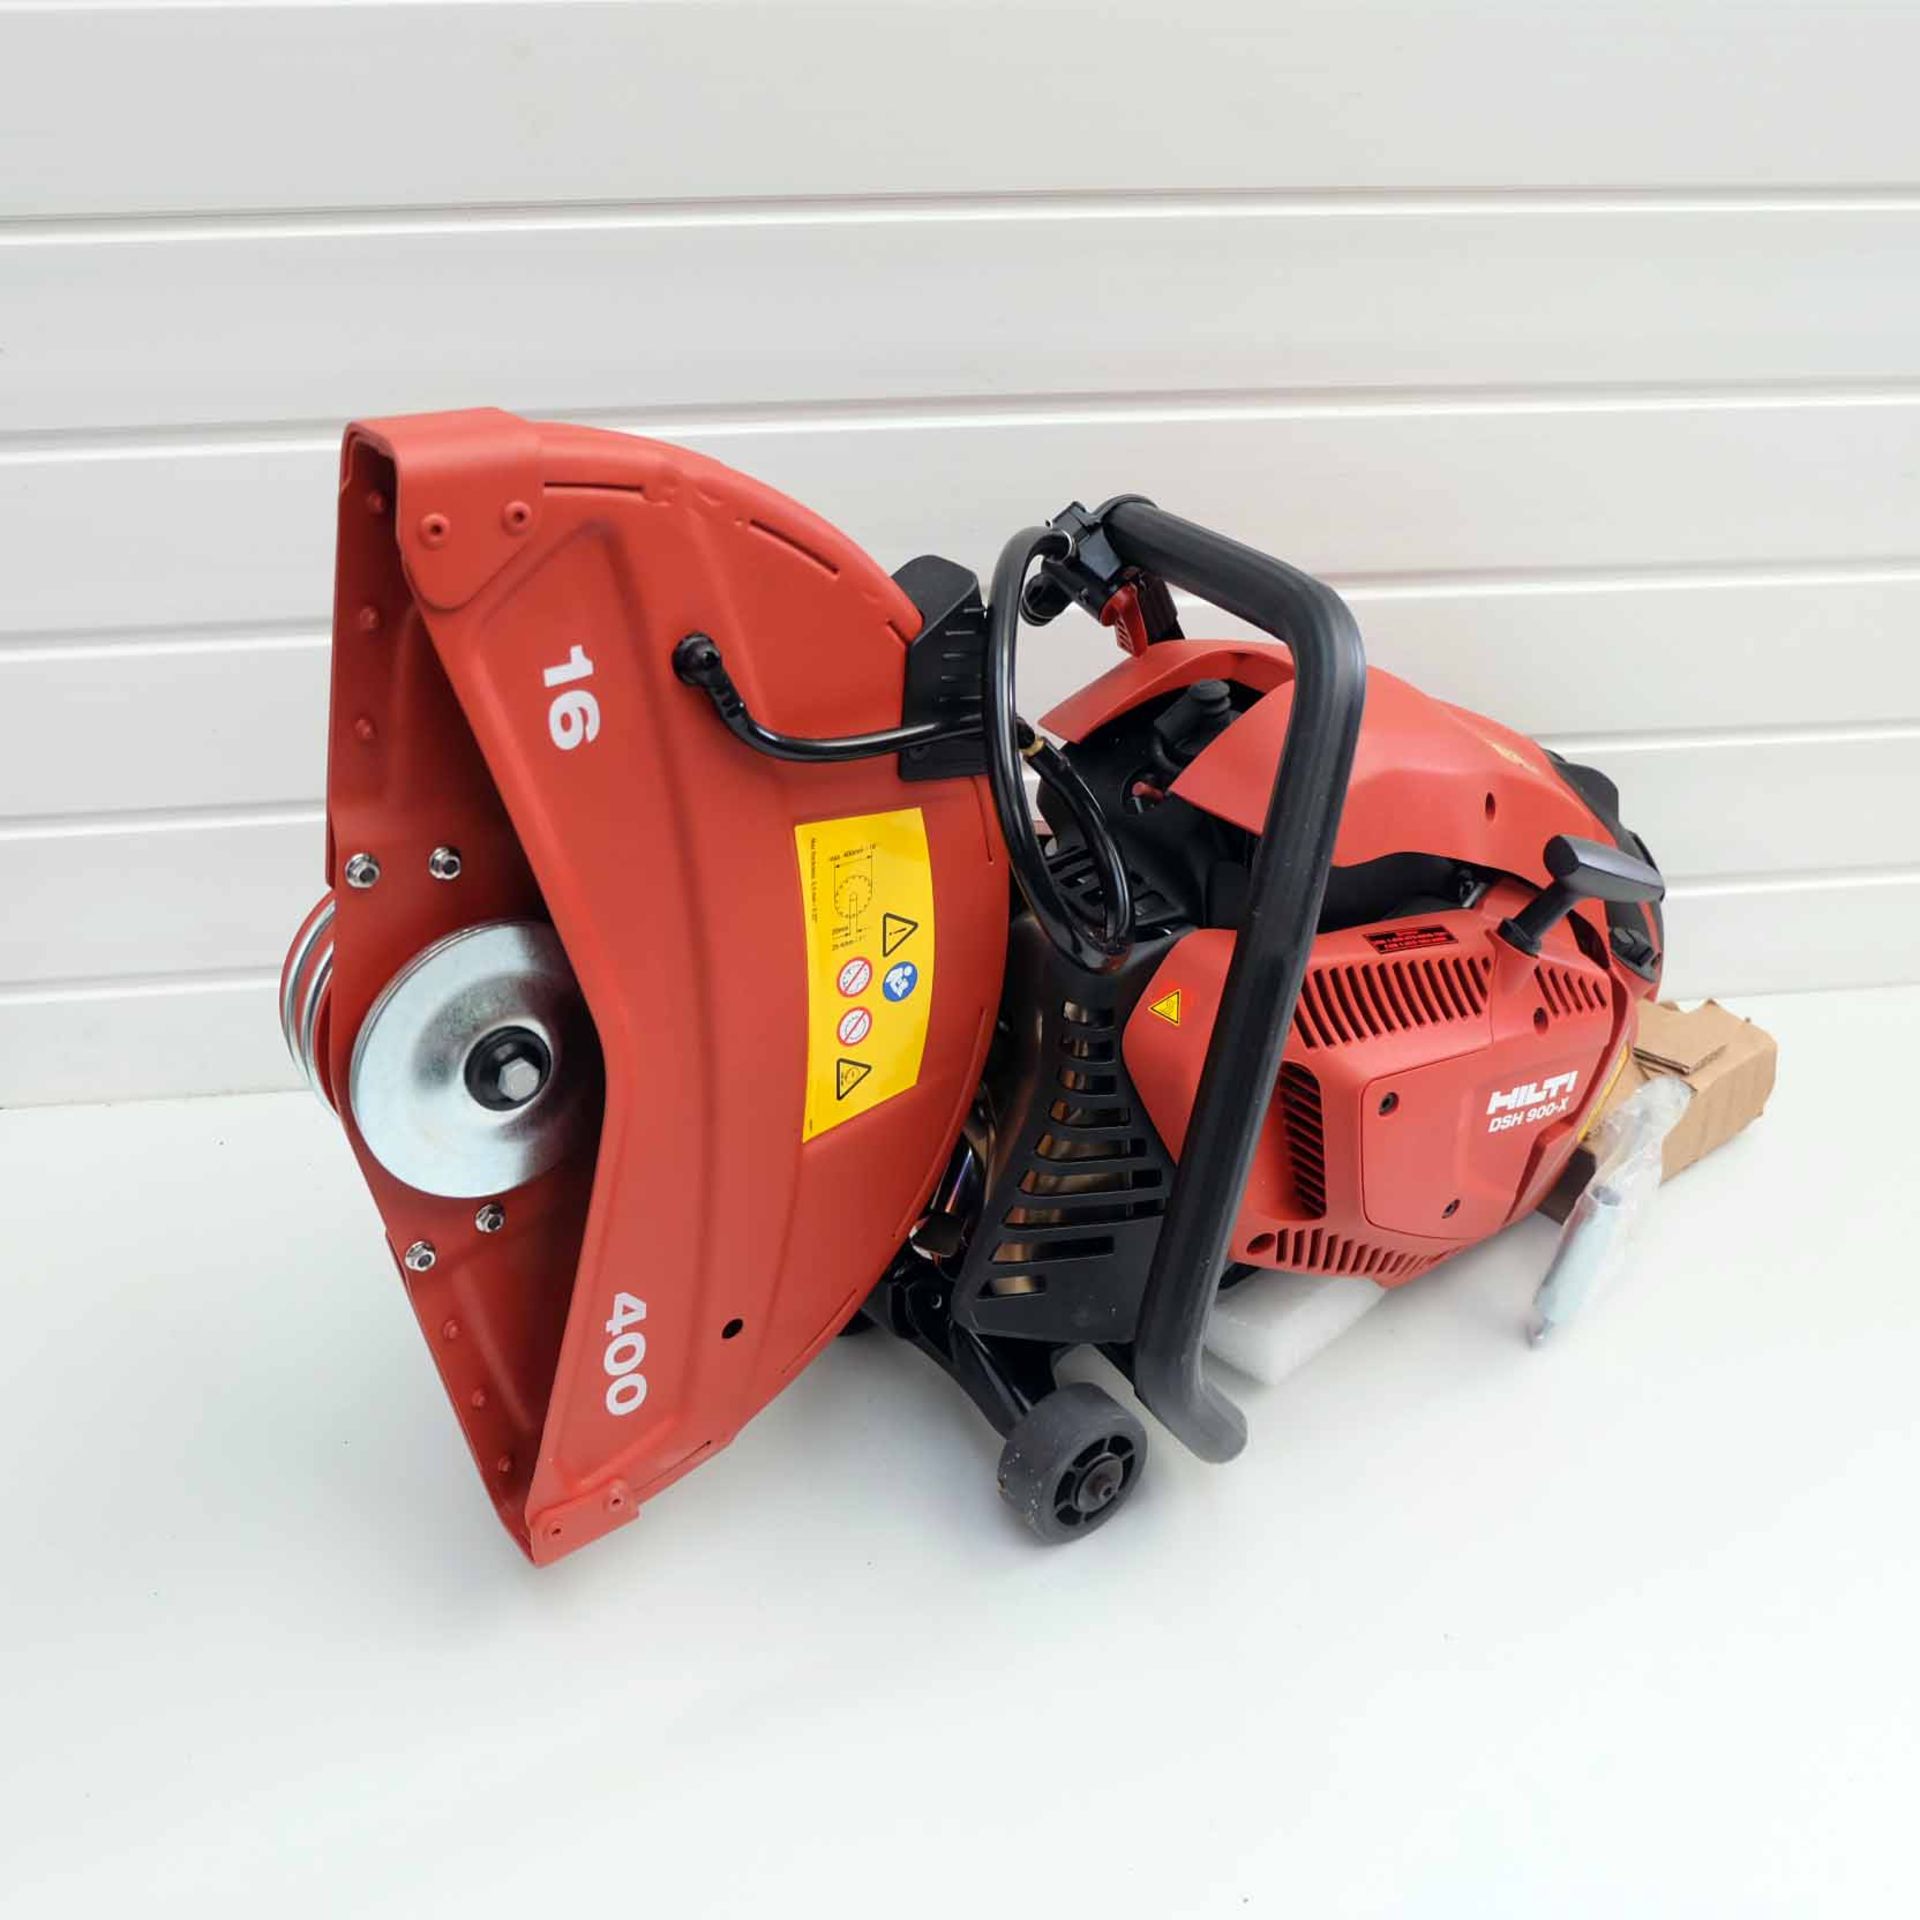 Hilti Hand Held Gas Saw. Model DSH 900-X 16". Complete With SP-16"x1" Blade. Easy Start Auto-Choke S - Image 5 of 25